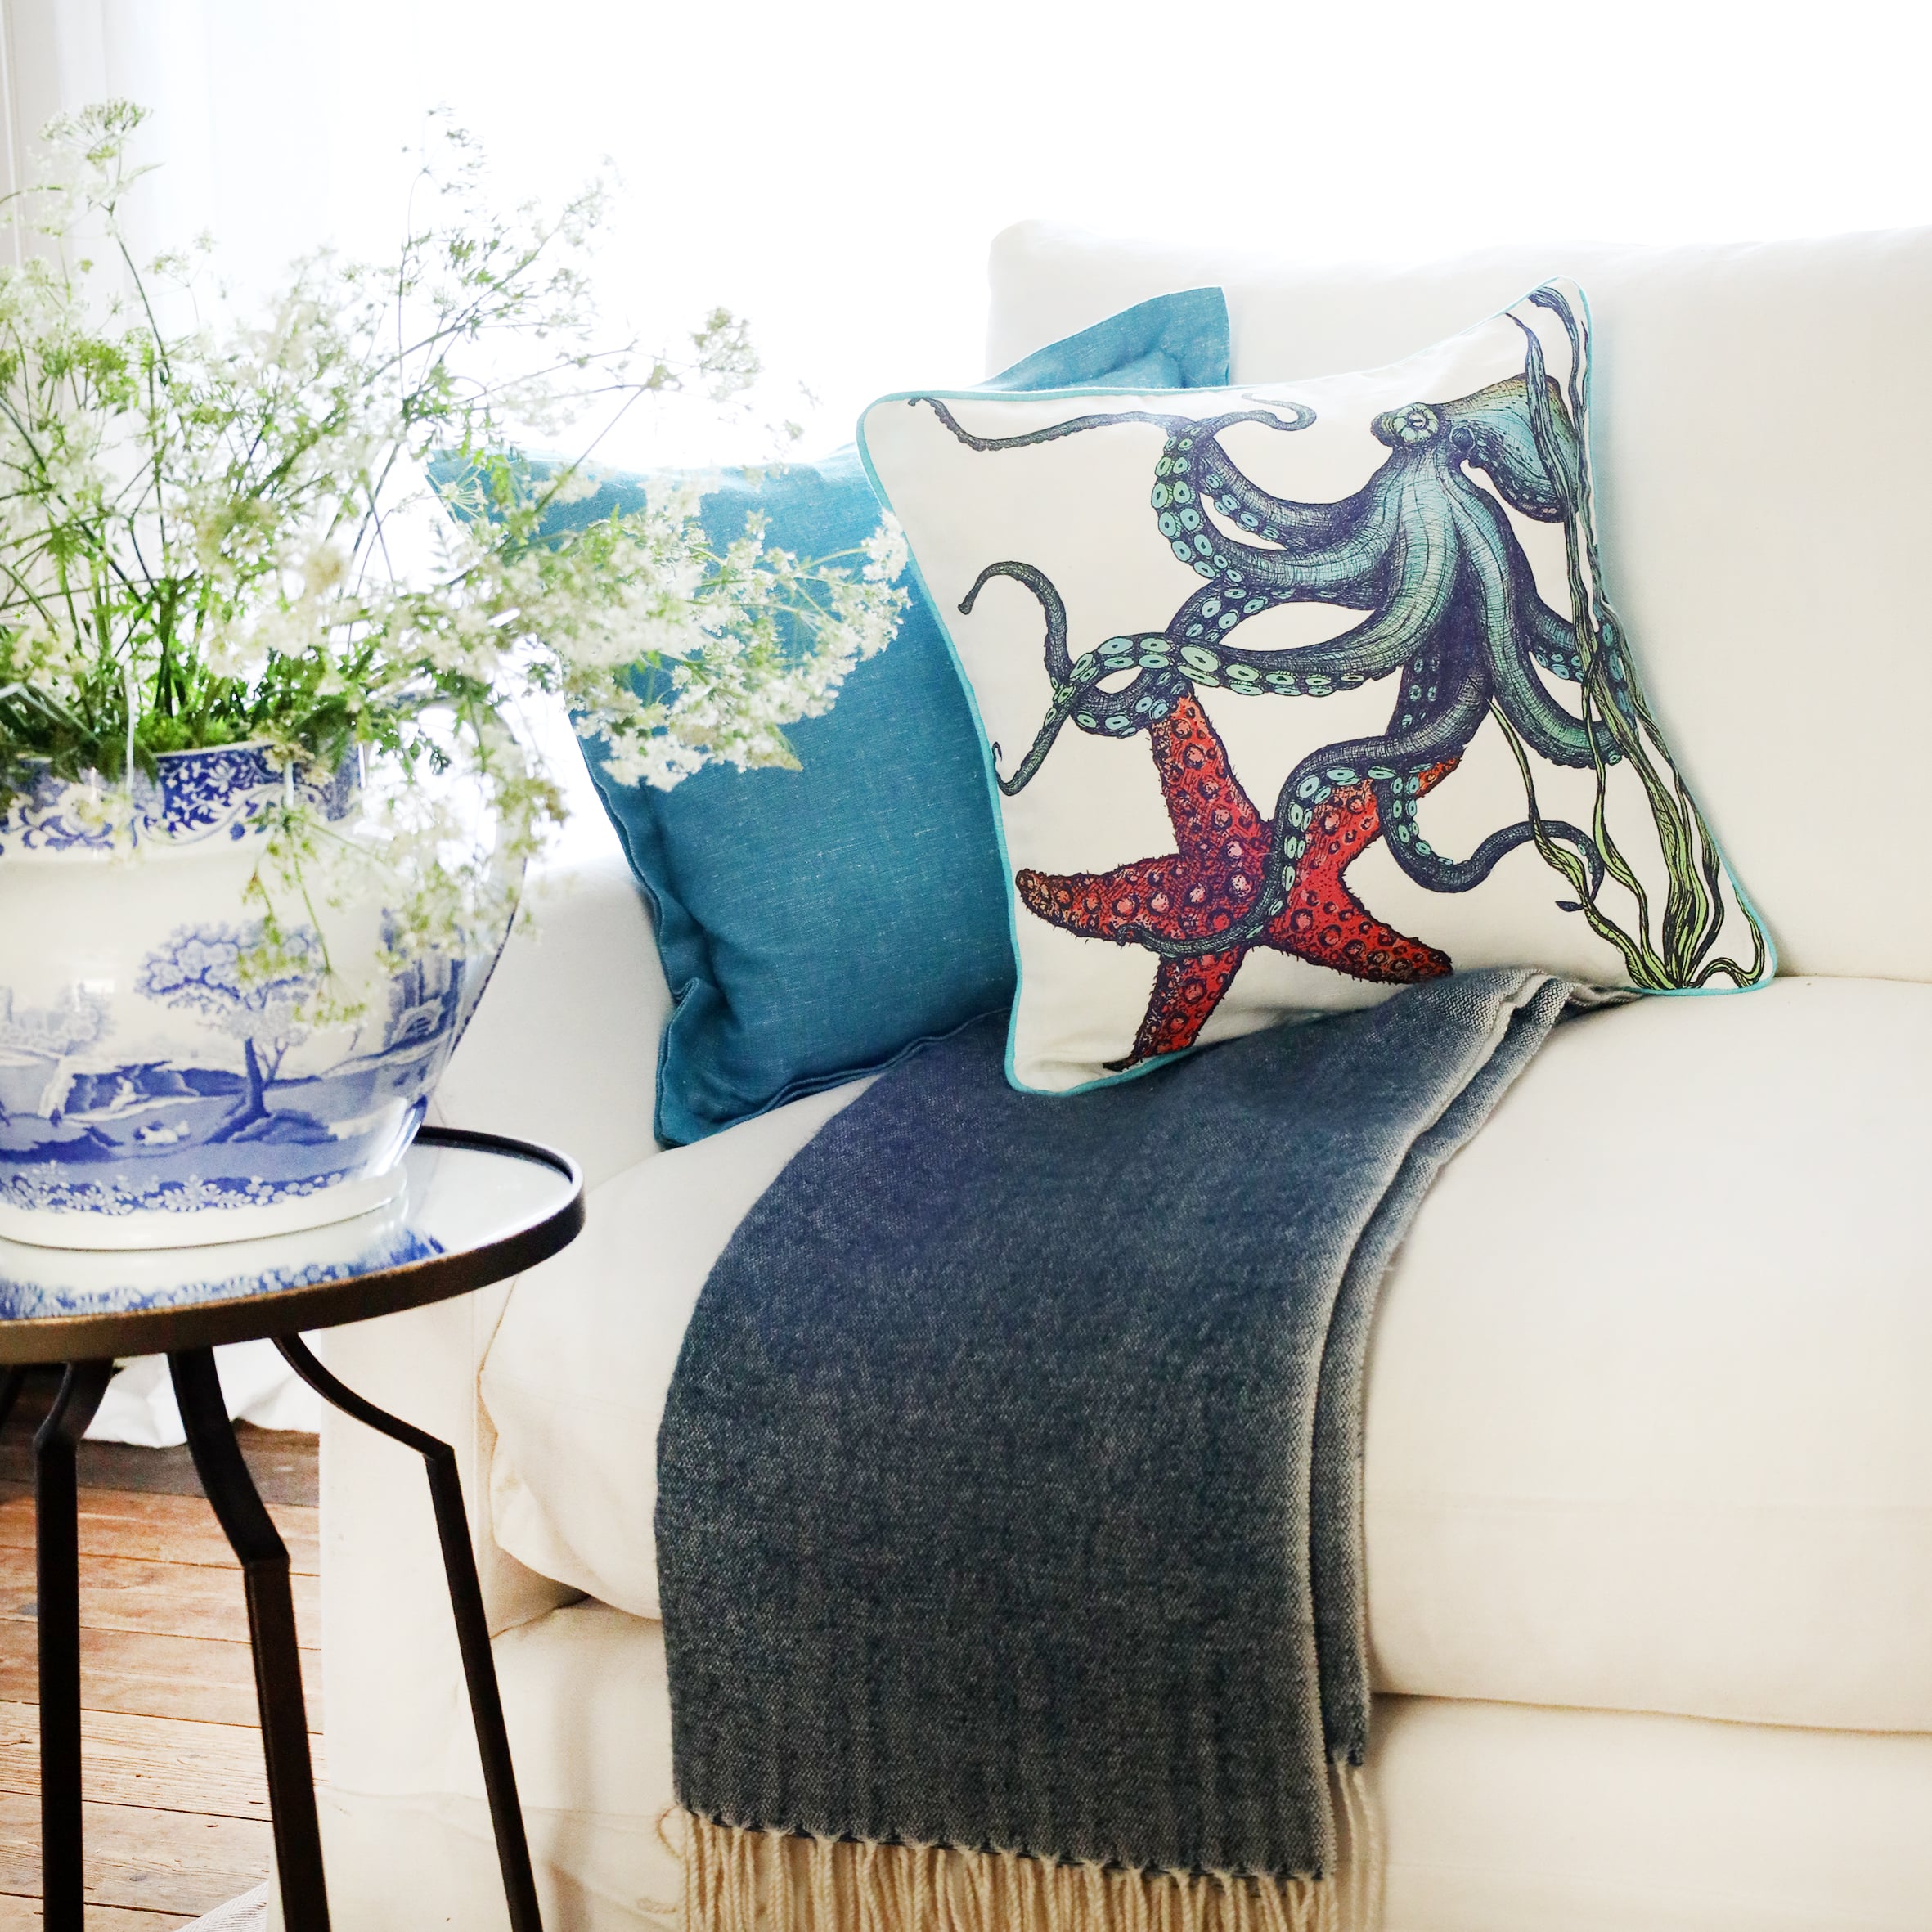 2 cushions an a white sofa with brightly coloured sea creatures illustrated  on with the sun streaming through the window at the back and a large willow pattern jug filled with cow parsley